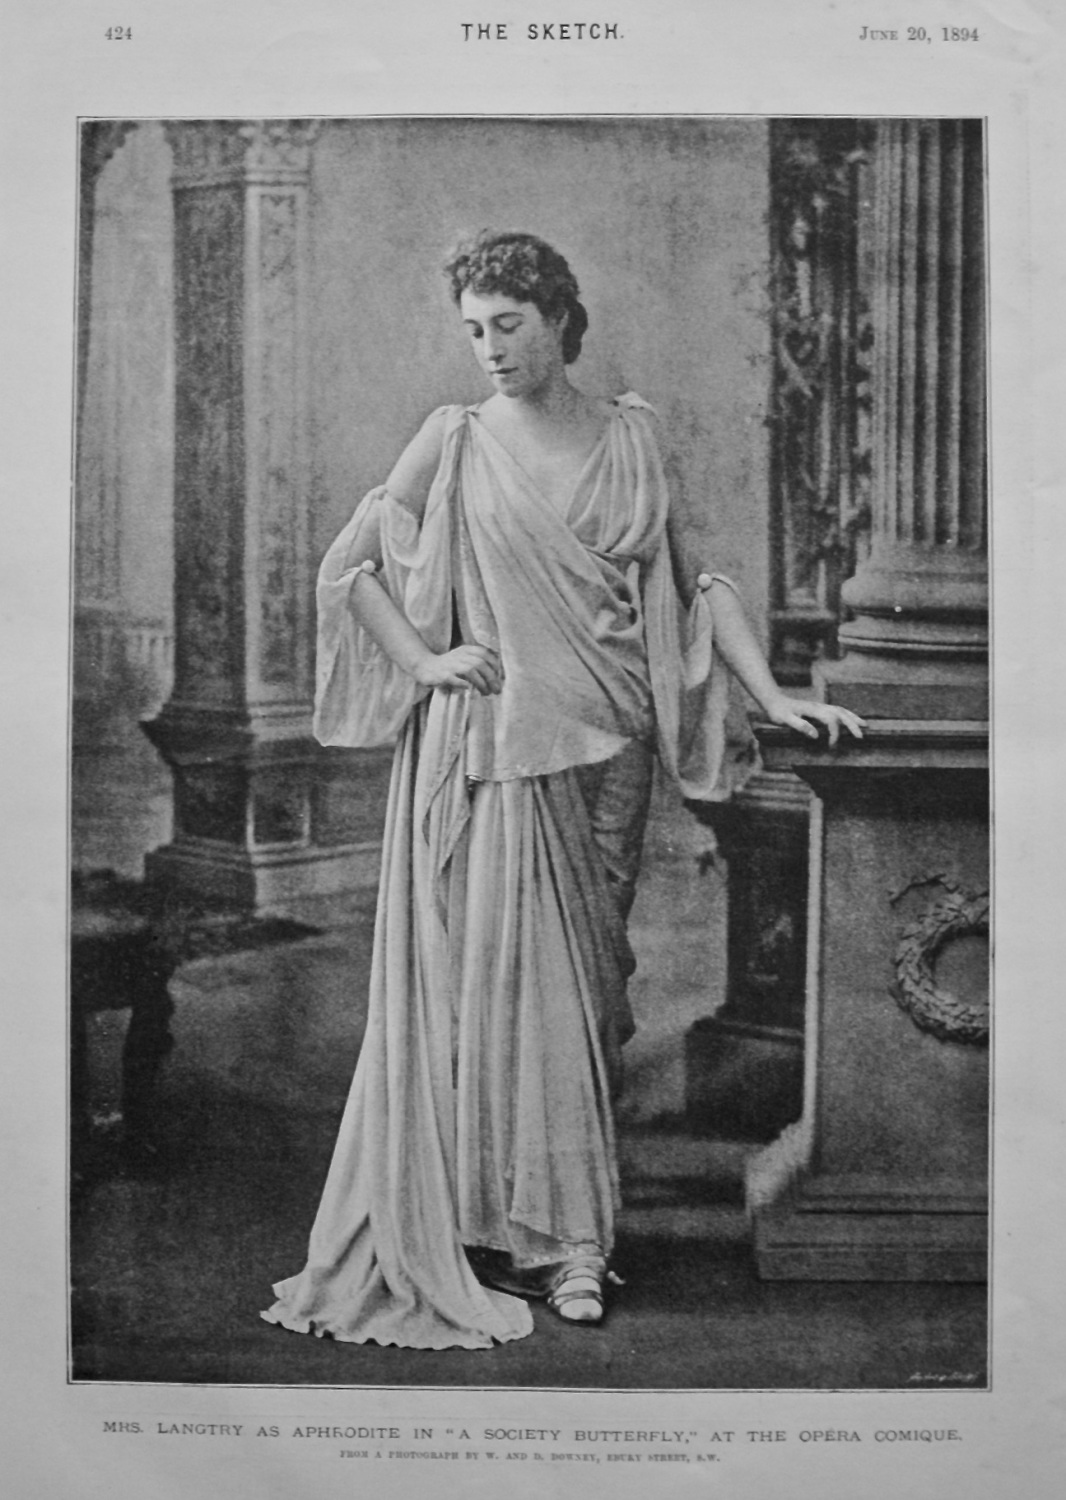 Miss Langtry as Aphrodite in 